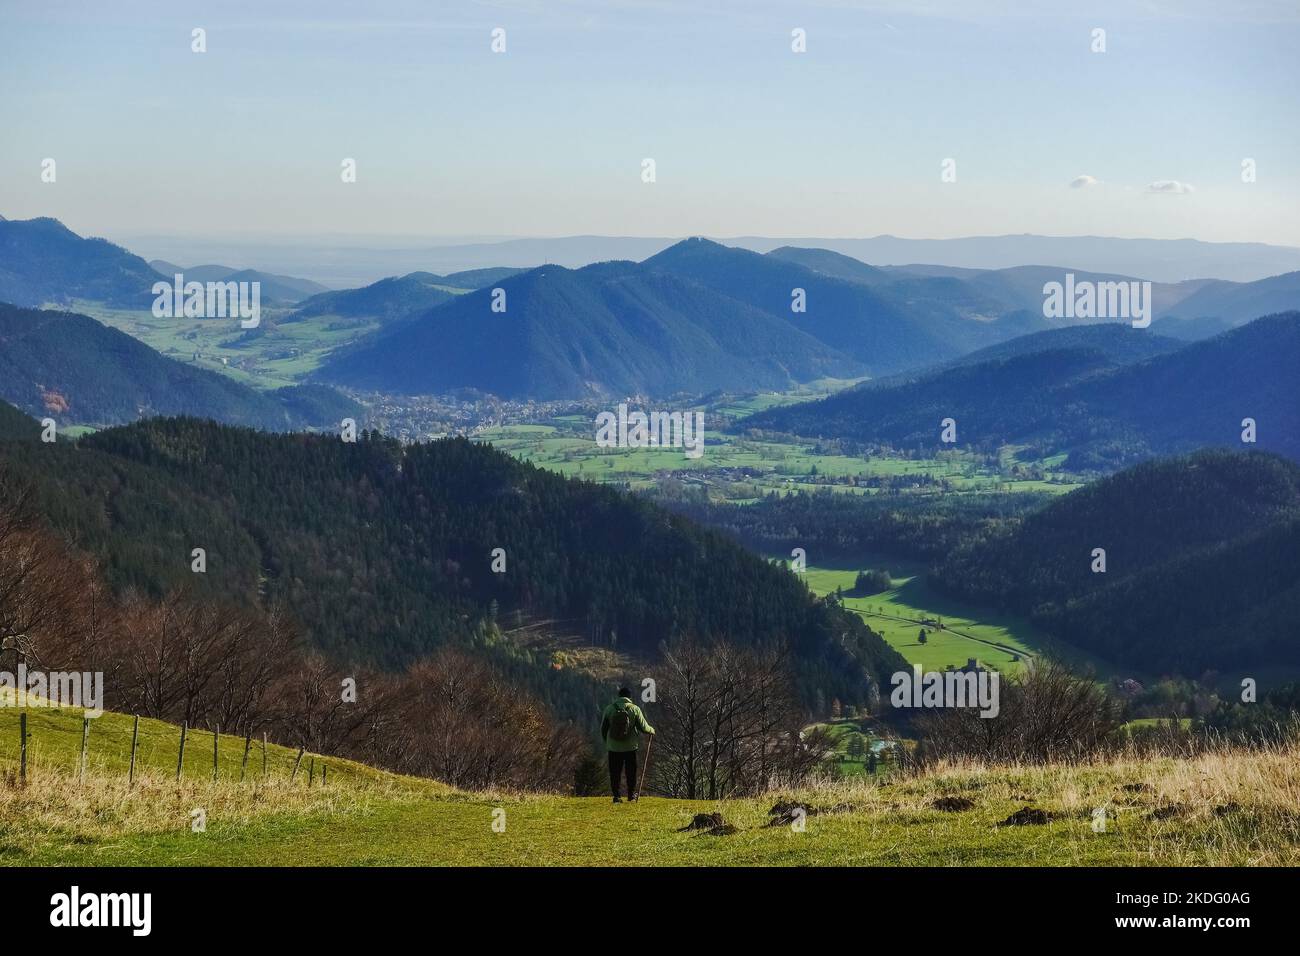 single hiker on a meadow walking downhill in the mountains detail view Stock Photo